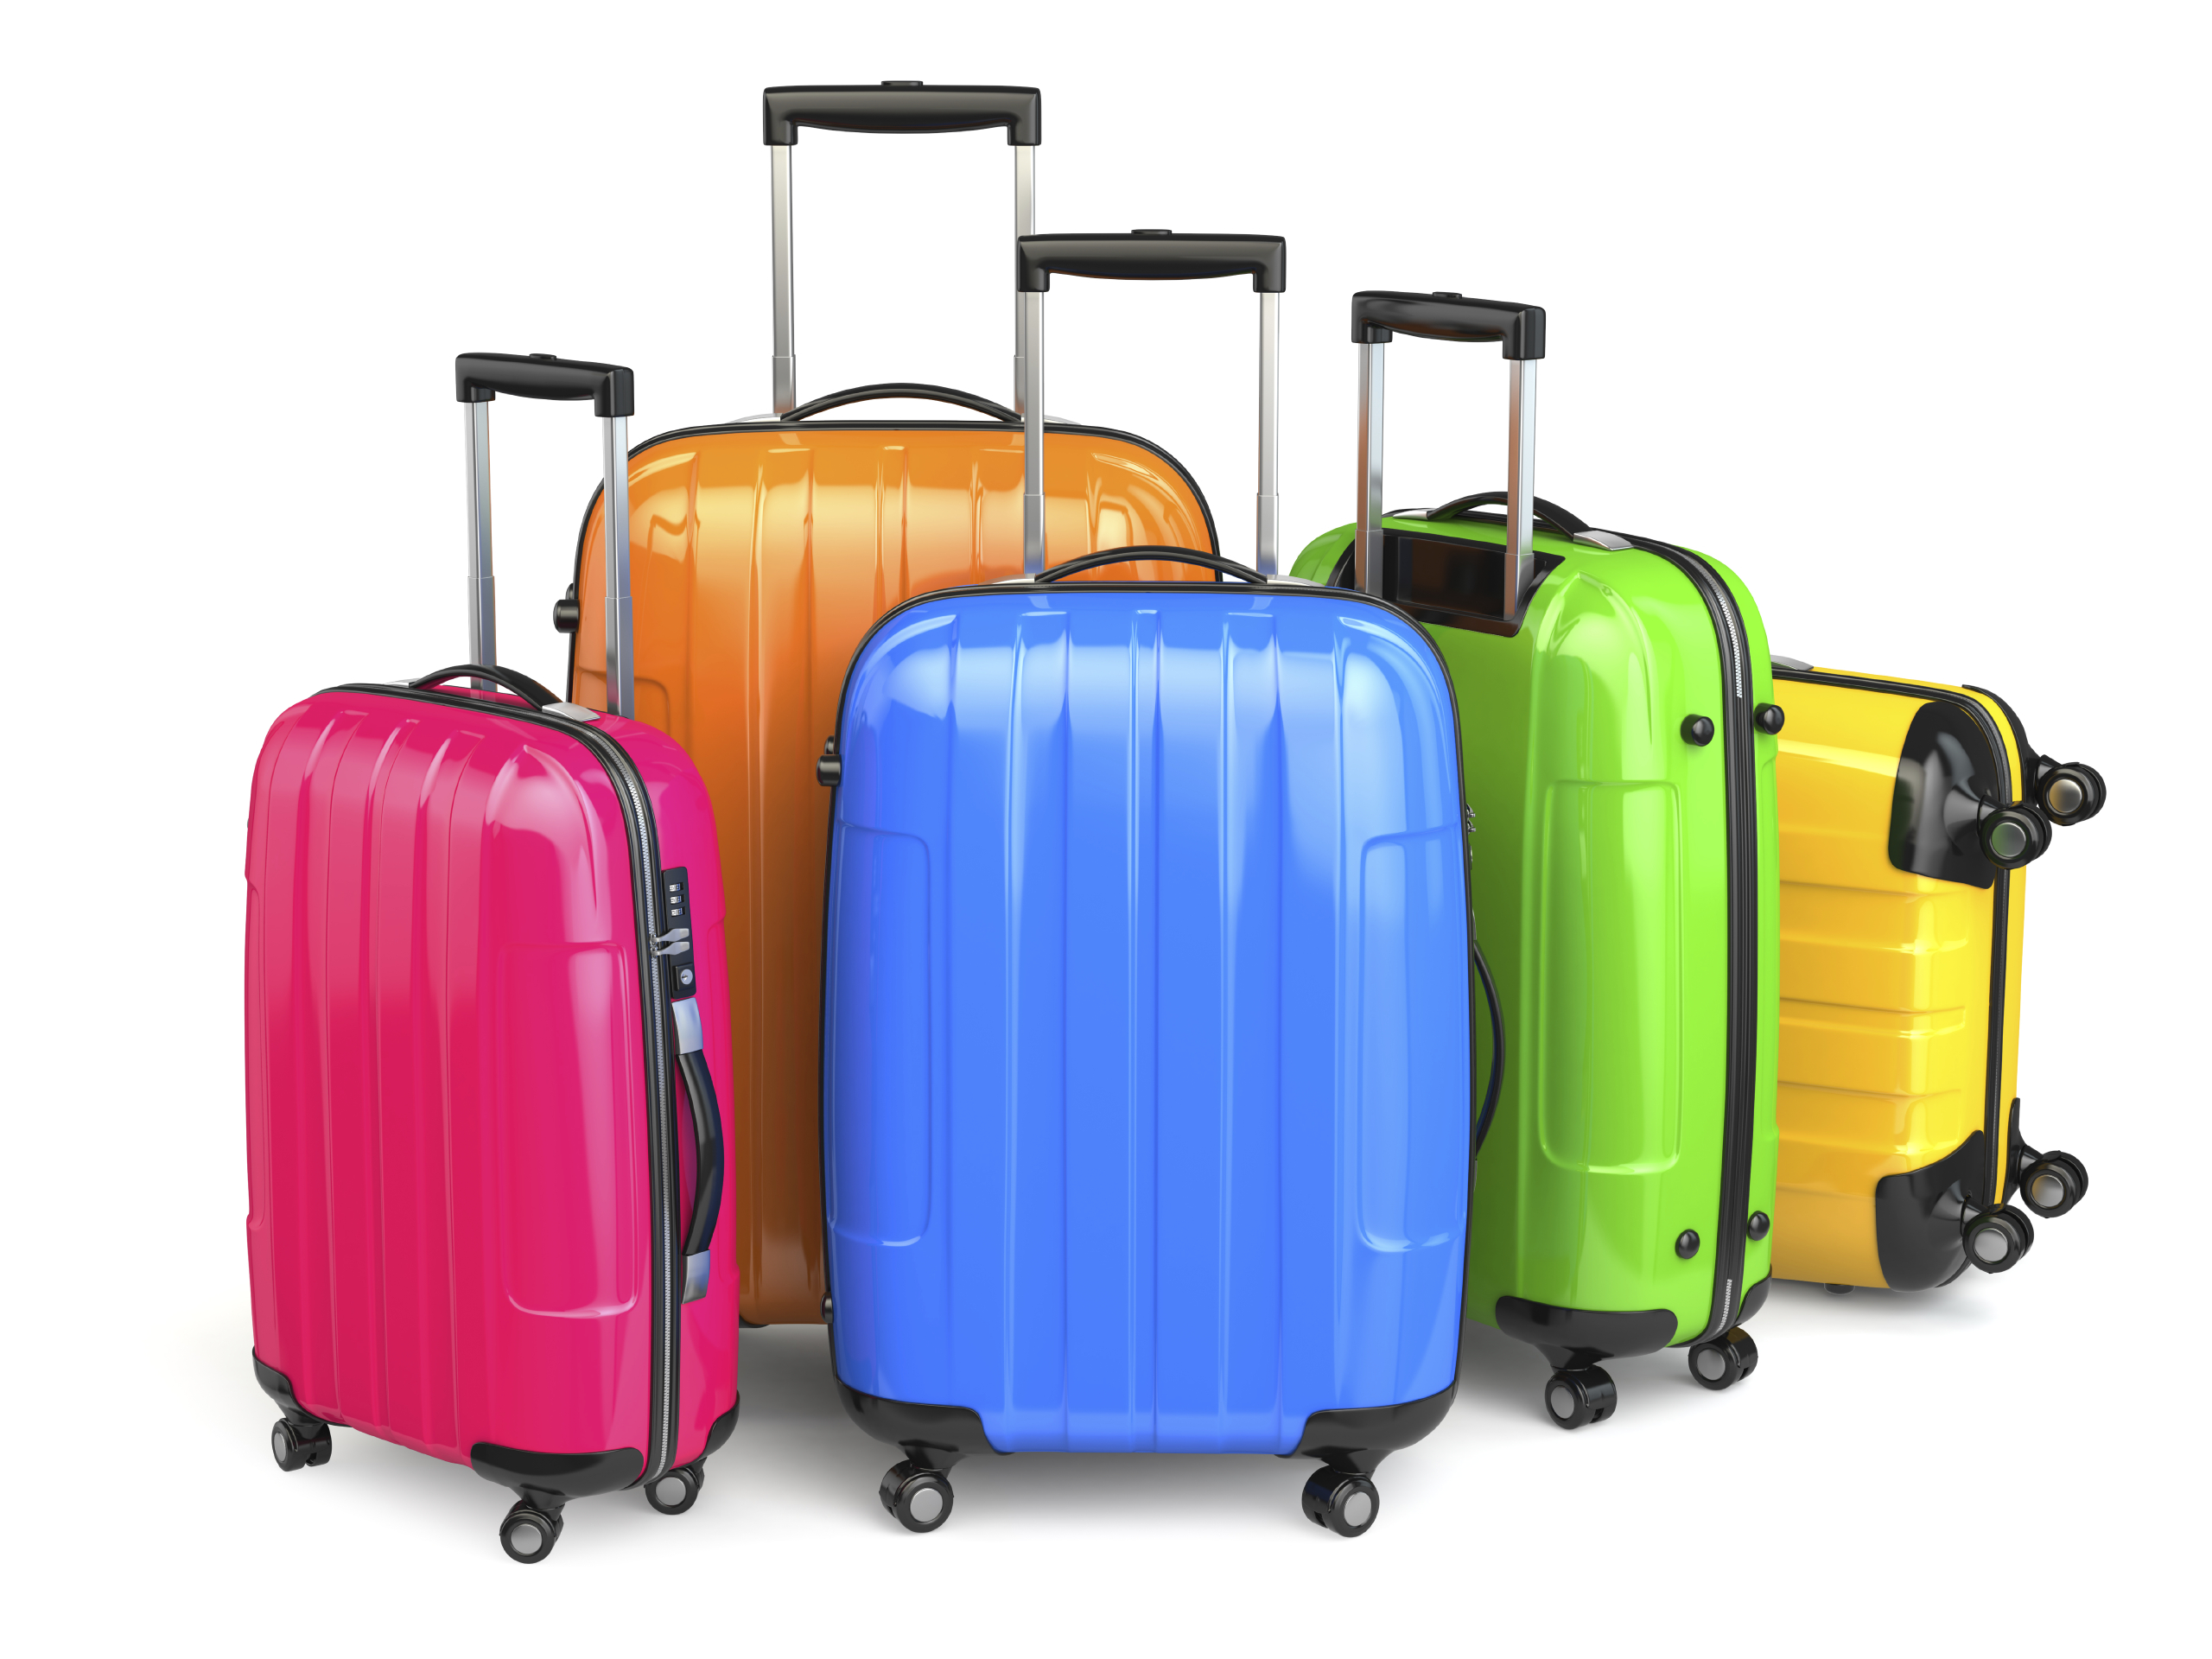 Luggages